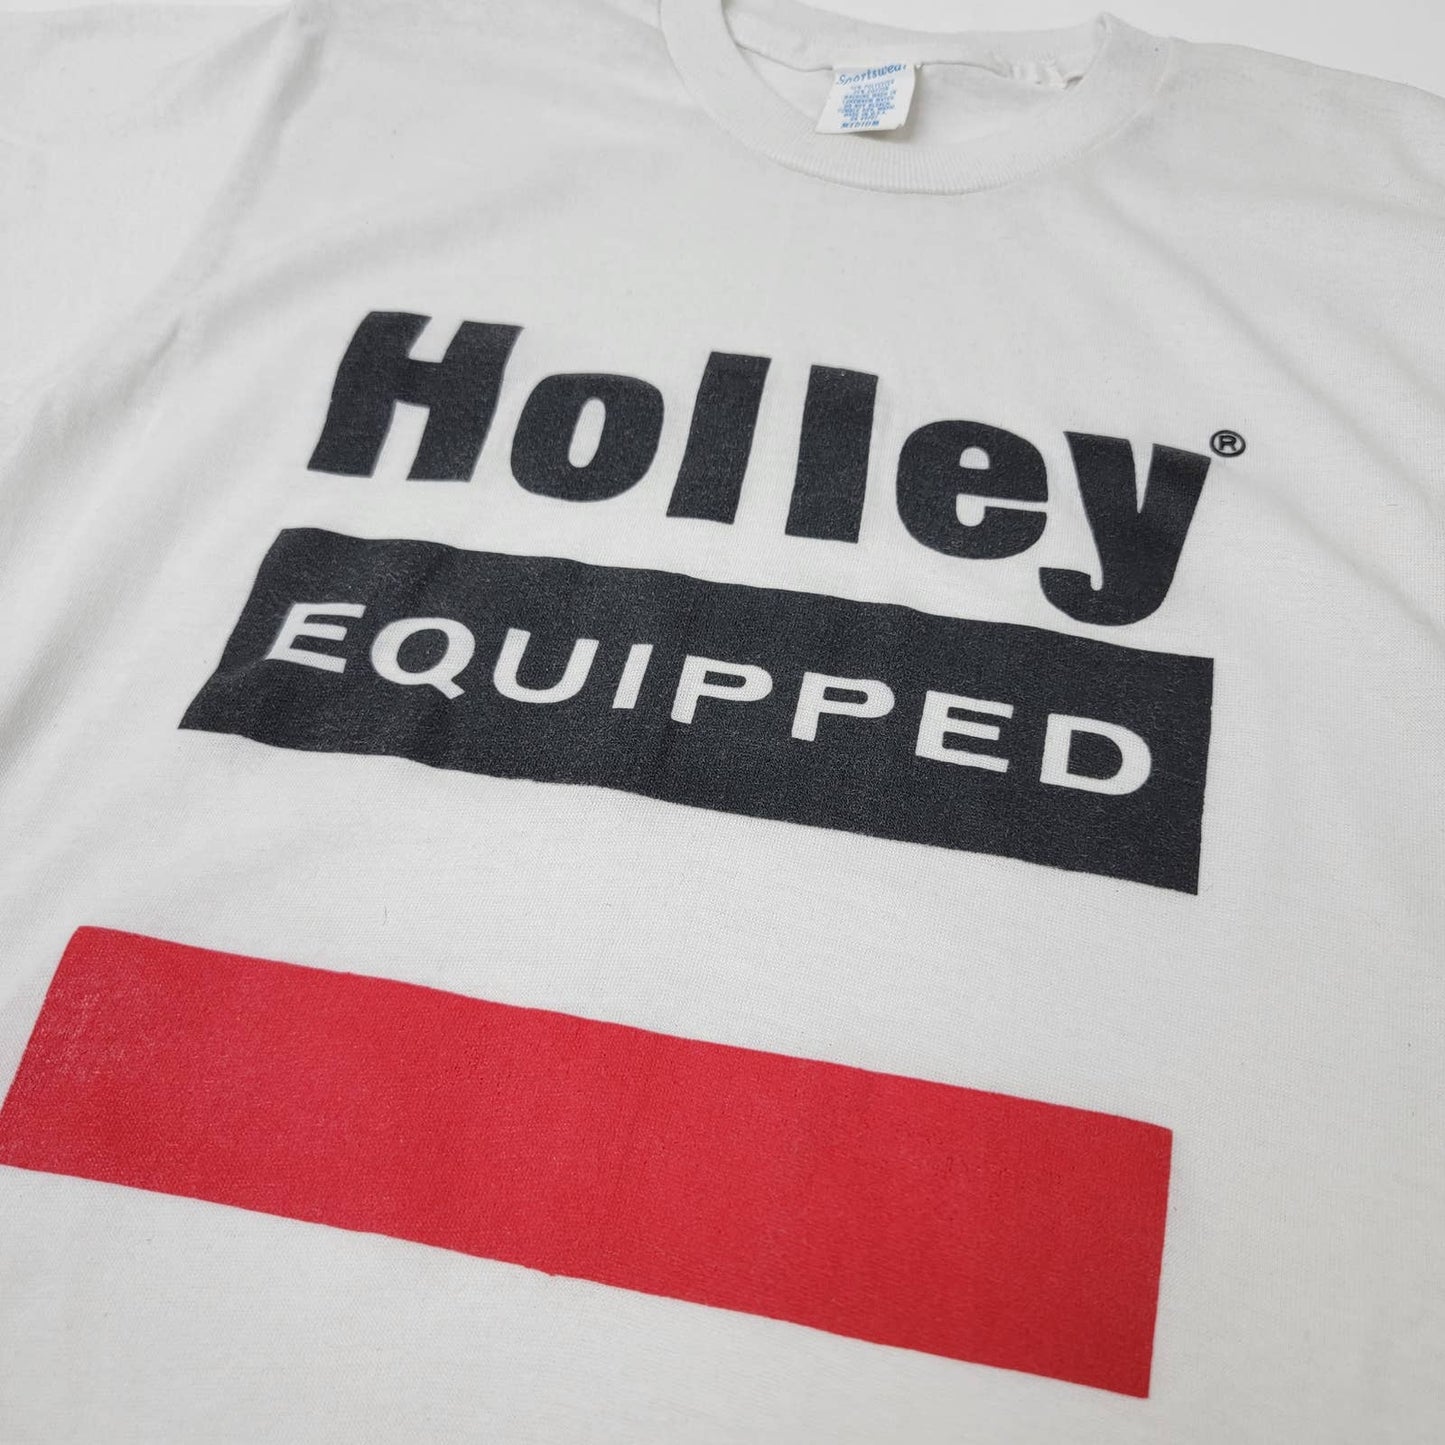 Vintage 80s Holley Equipped Single-Stitch Tee Shirt - M